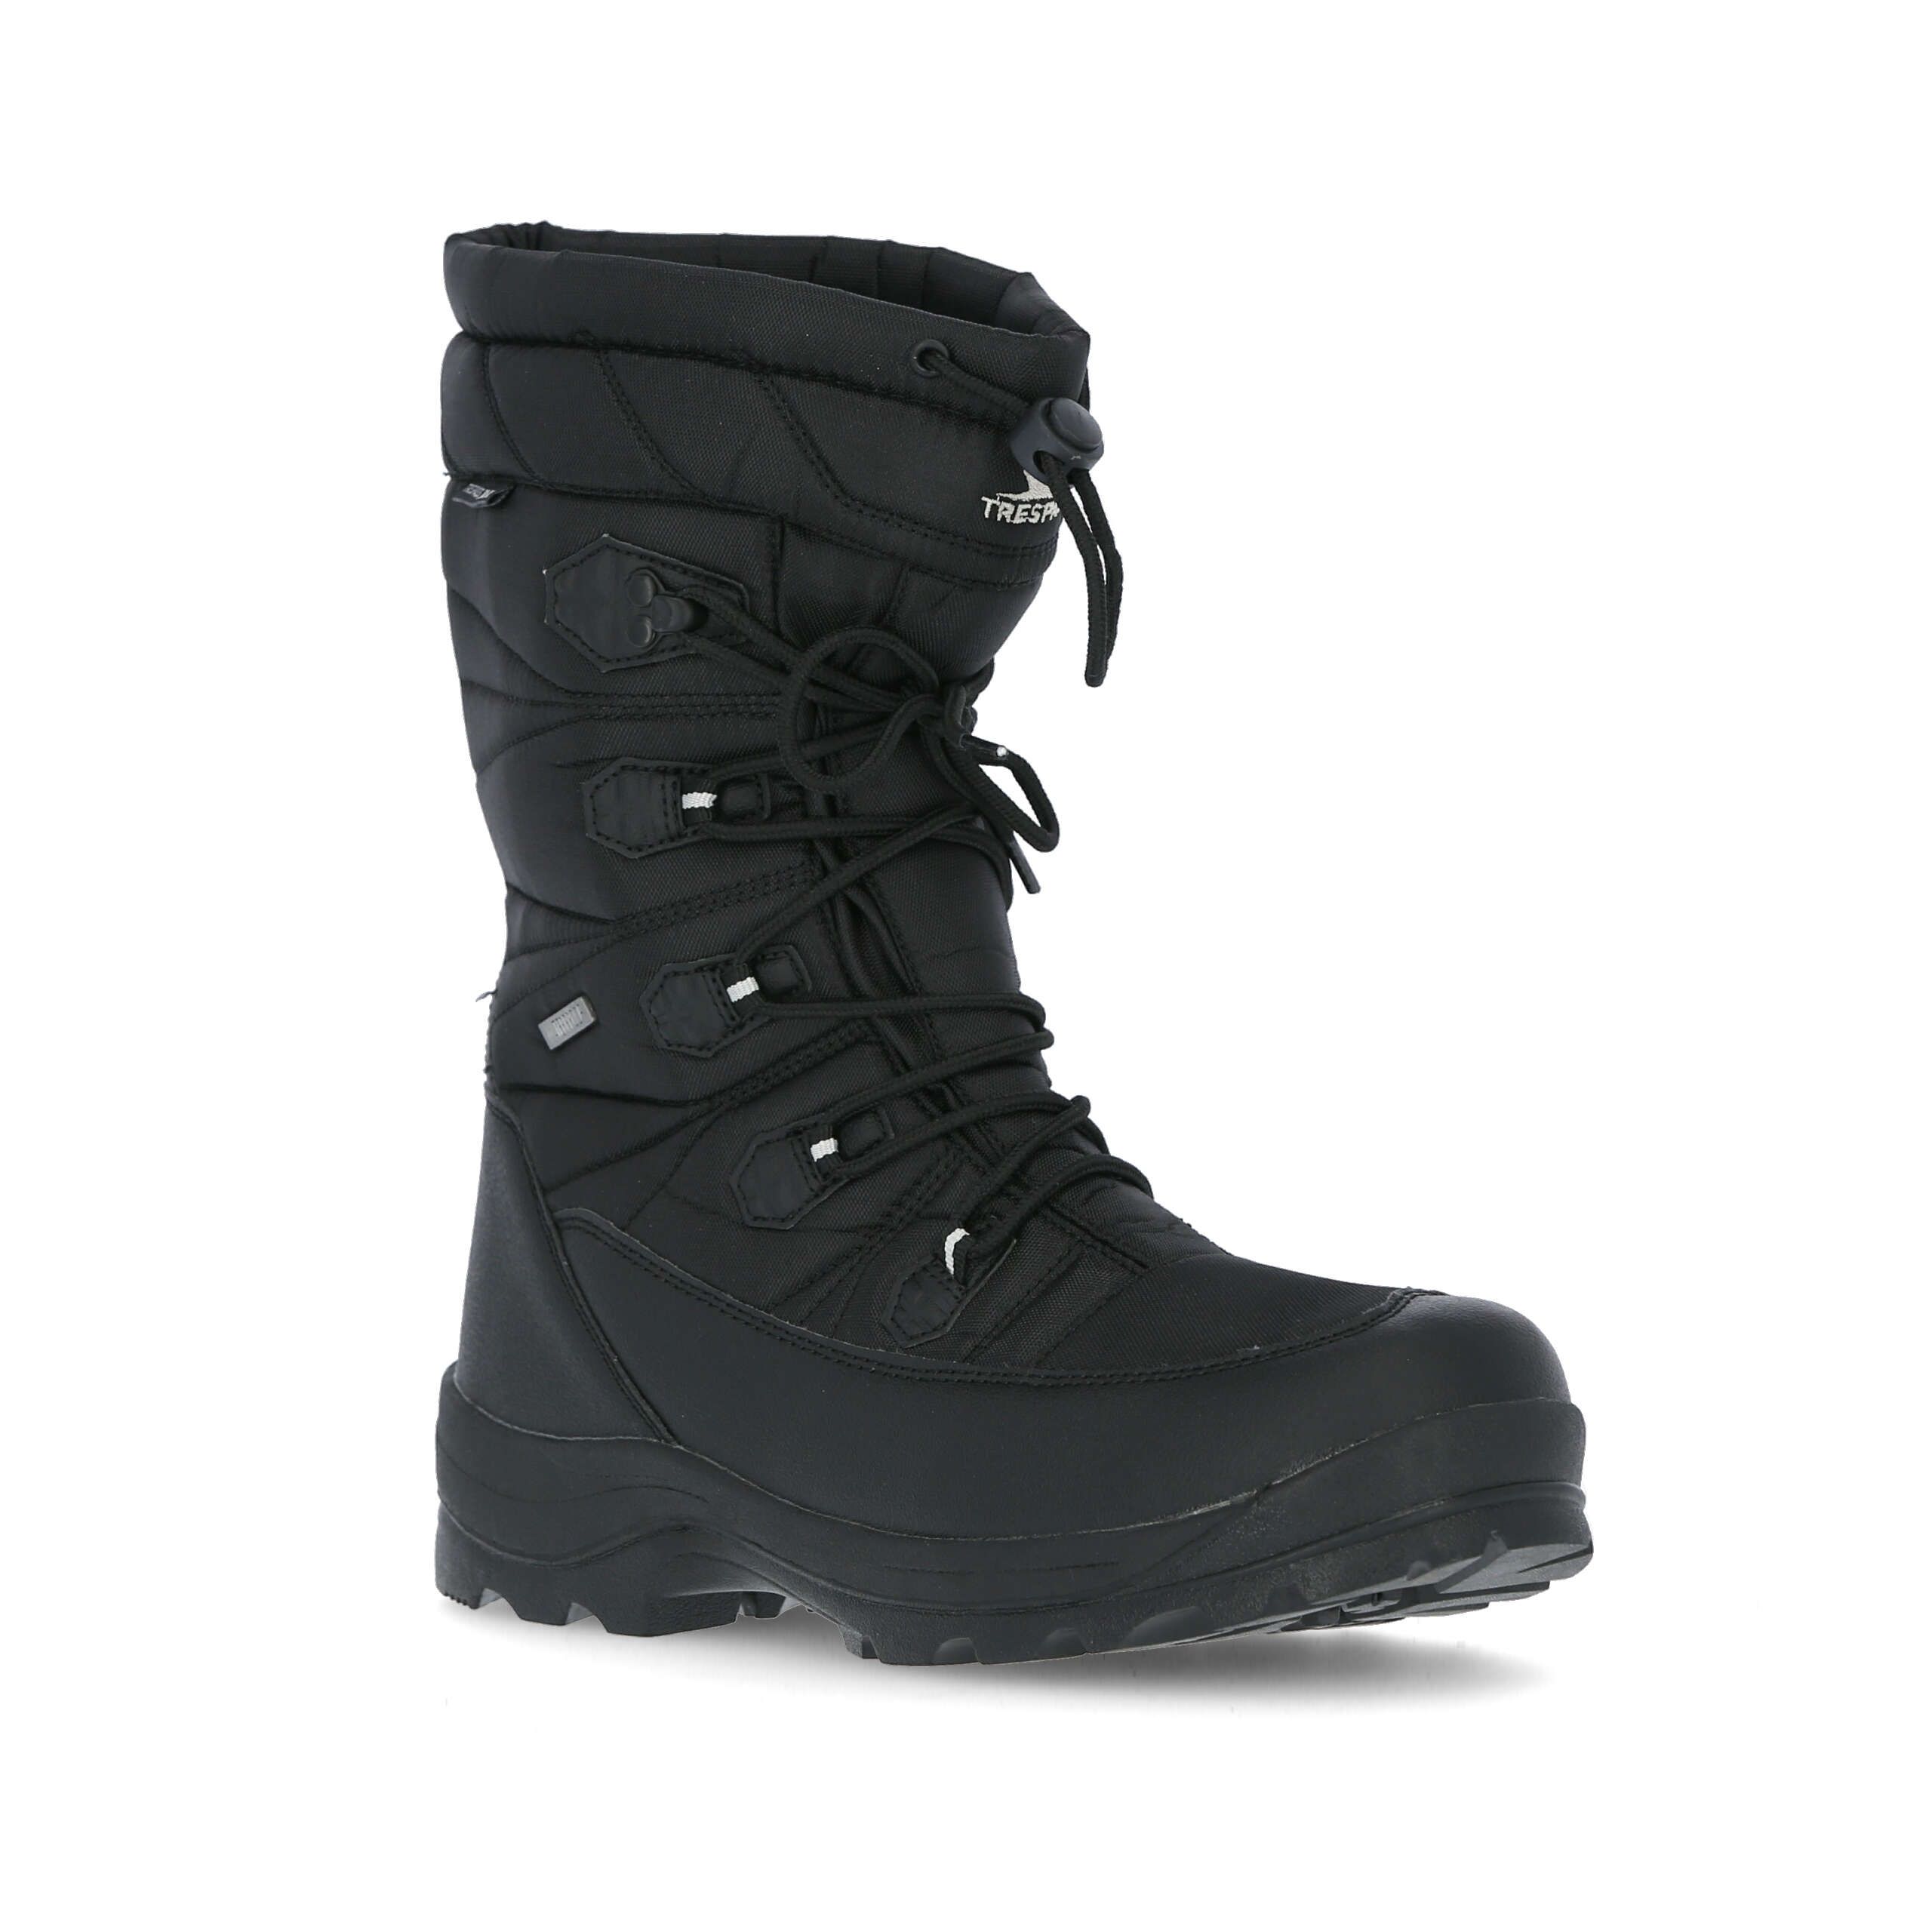 Yetti Mens Lace Up Snow Boots